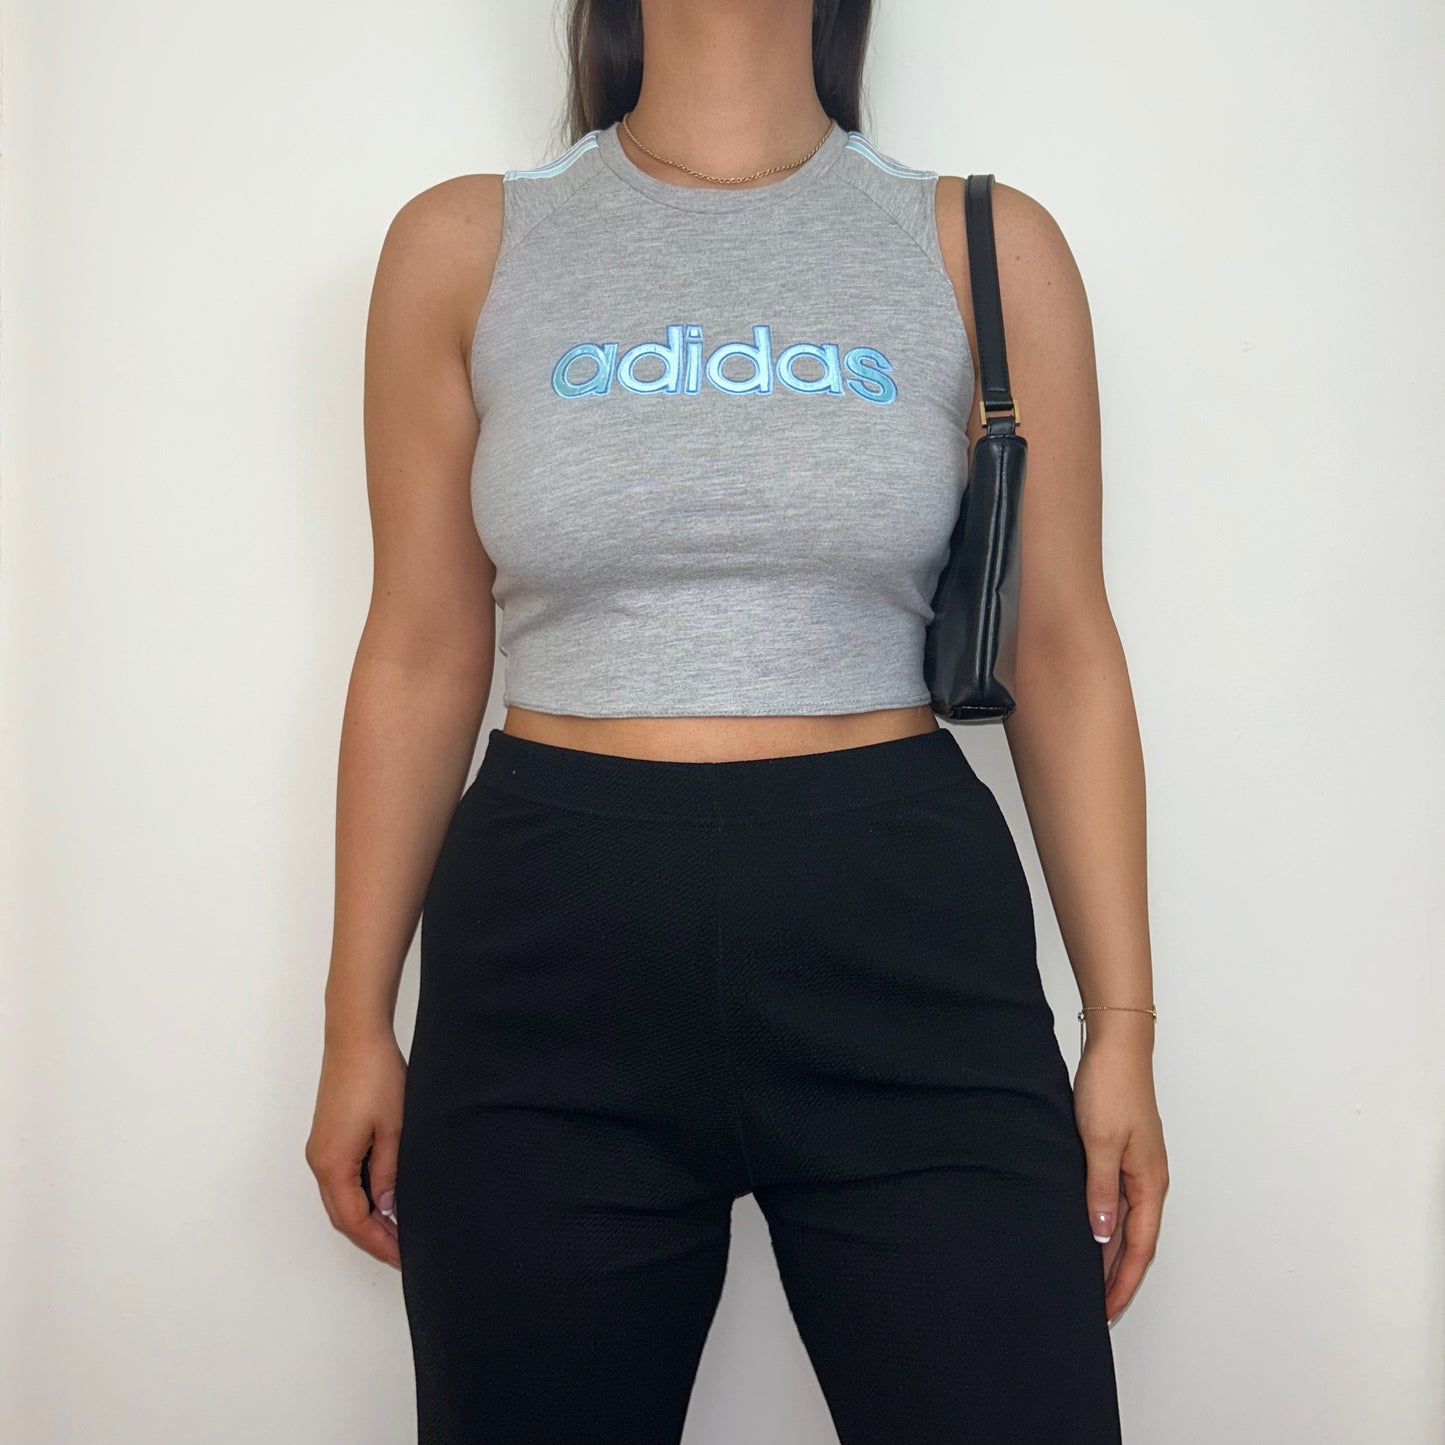 grey short sleeve crop top with light blue adidas logo shown on a model wearing black trousers and a black shoulder bag